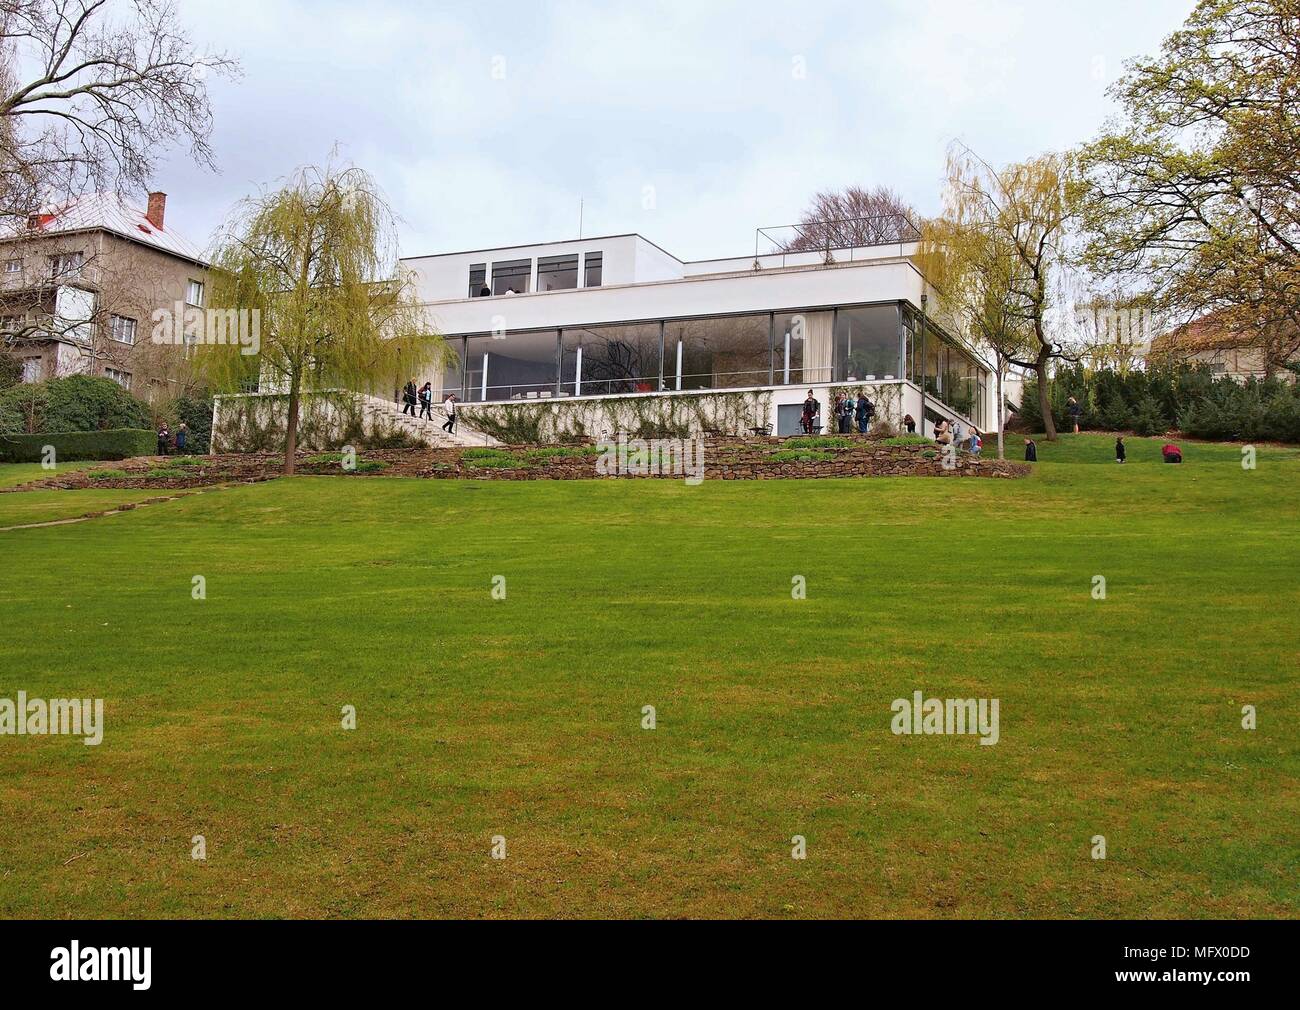 BRNO, CZECH REPUBLIC - APRIL 13, 2018: Garden view of the Villa Tugendhat with visitors on the terrace. Stock Photo